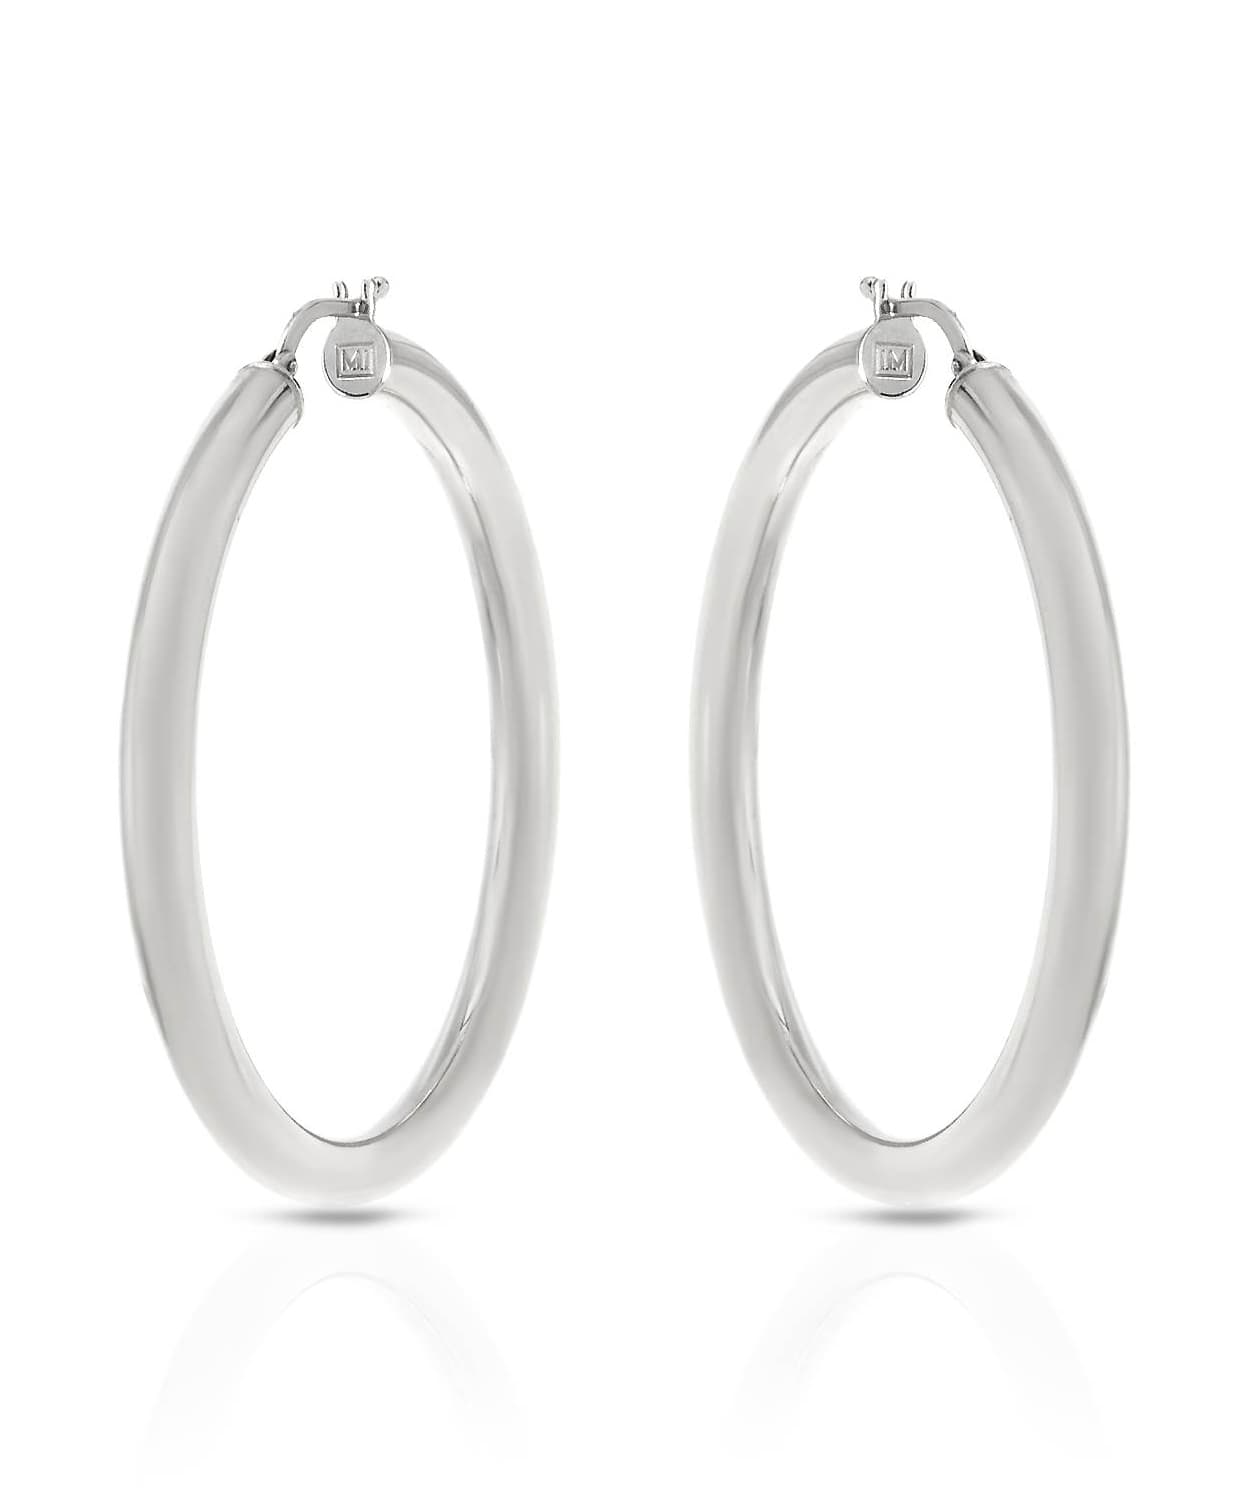 46mm Large 14k White Gold Classic Hoop Earrings View 1